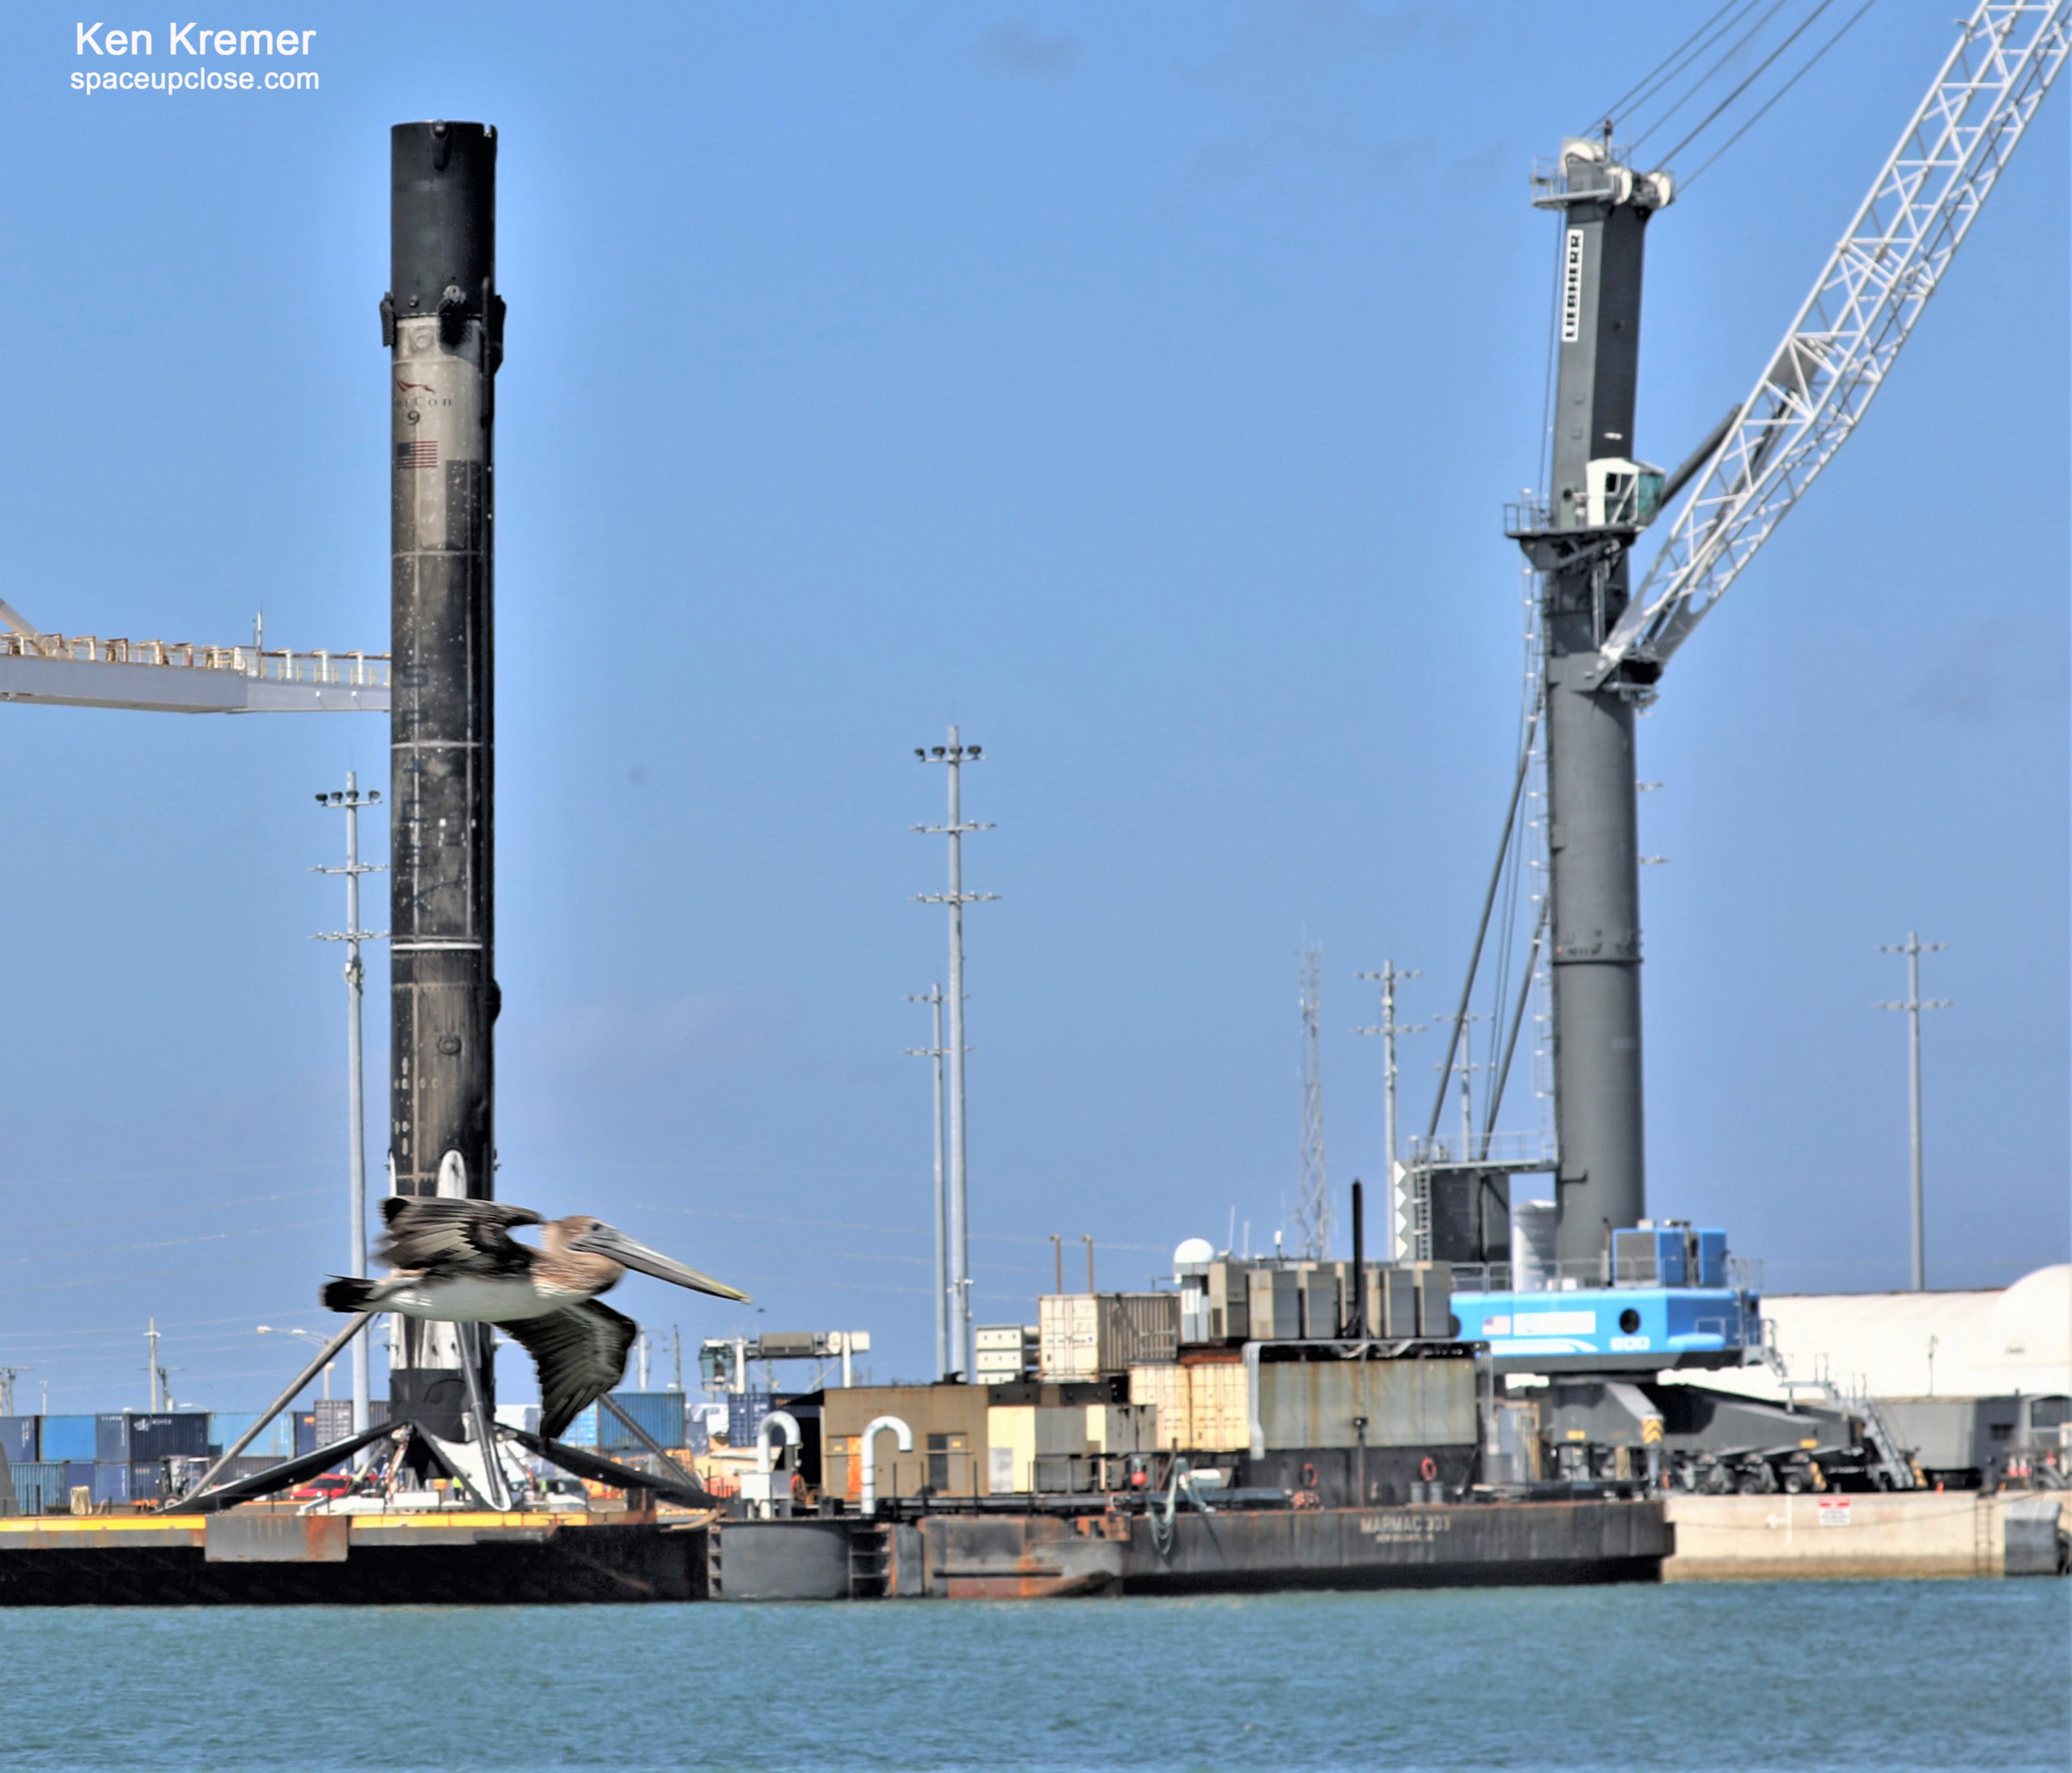 Thoroughly Sooty 11th Flown/Landed SpaceX Falcon 9 Booster Returns to Port Canaveral as Next Starlink Launch Targets March 9: Watch Live/Photos